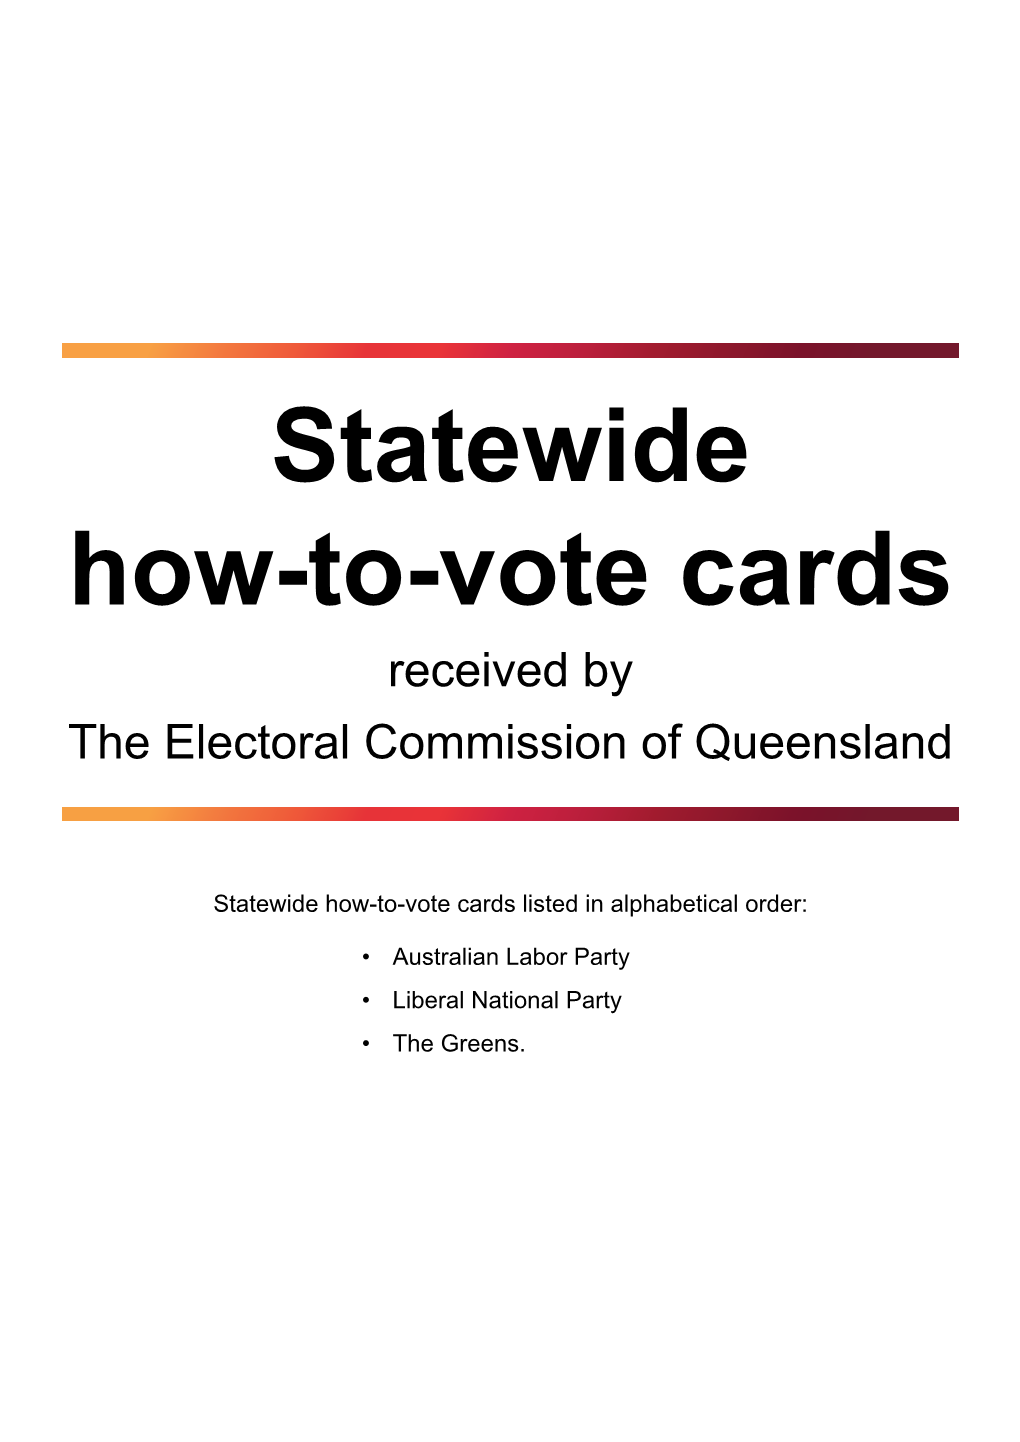 Statewide How-To-Vote Cards Received by the Electoral Commission of Queensland